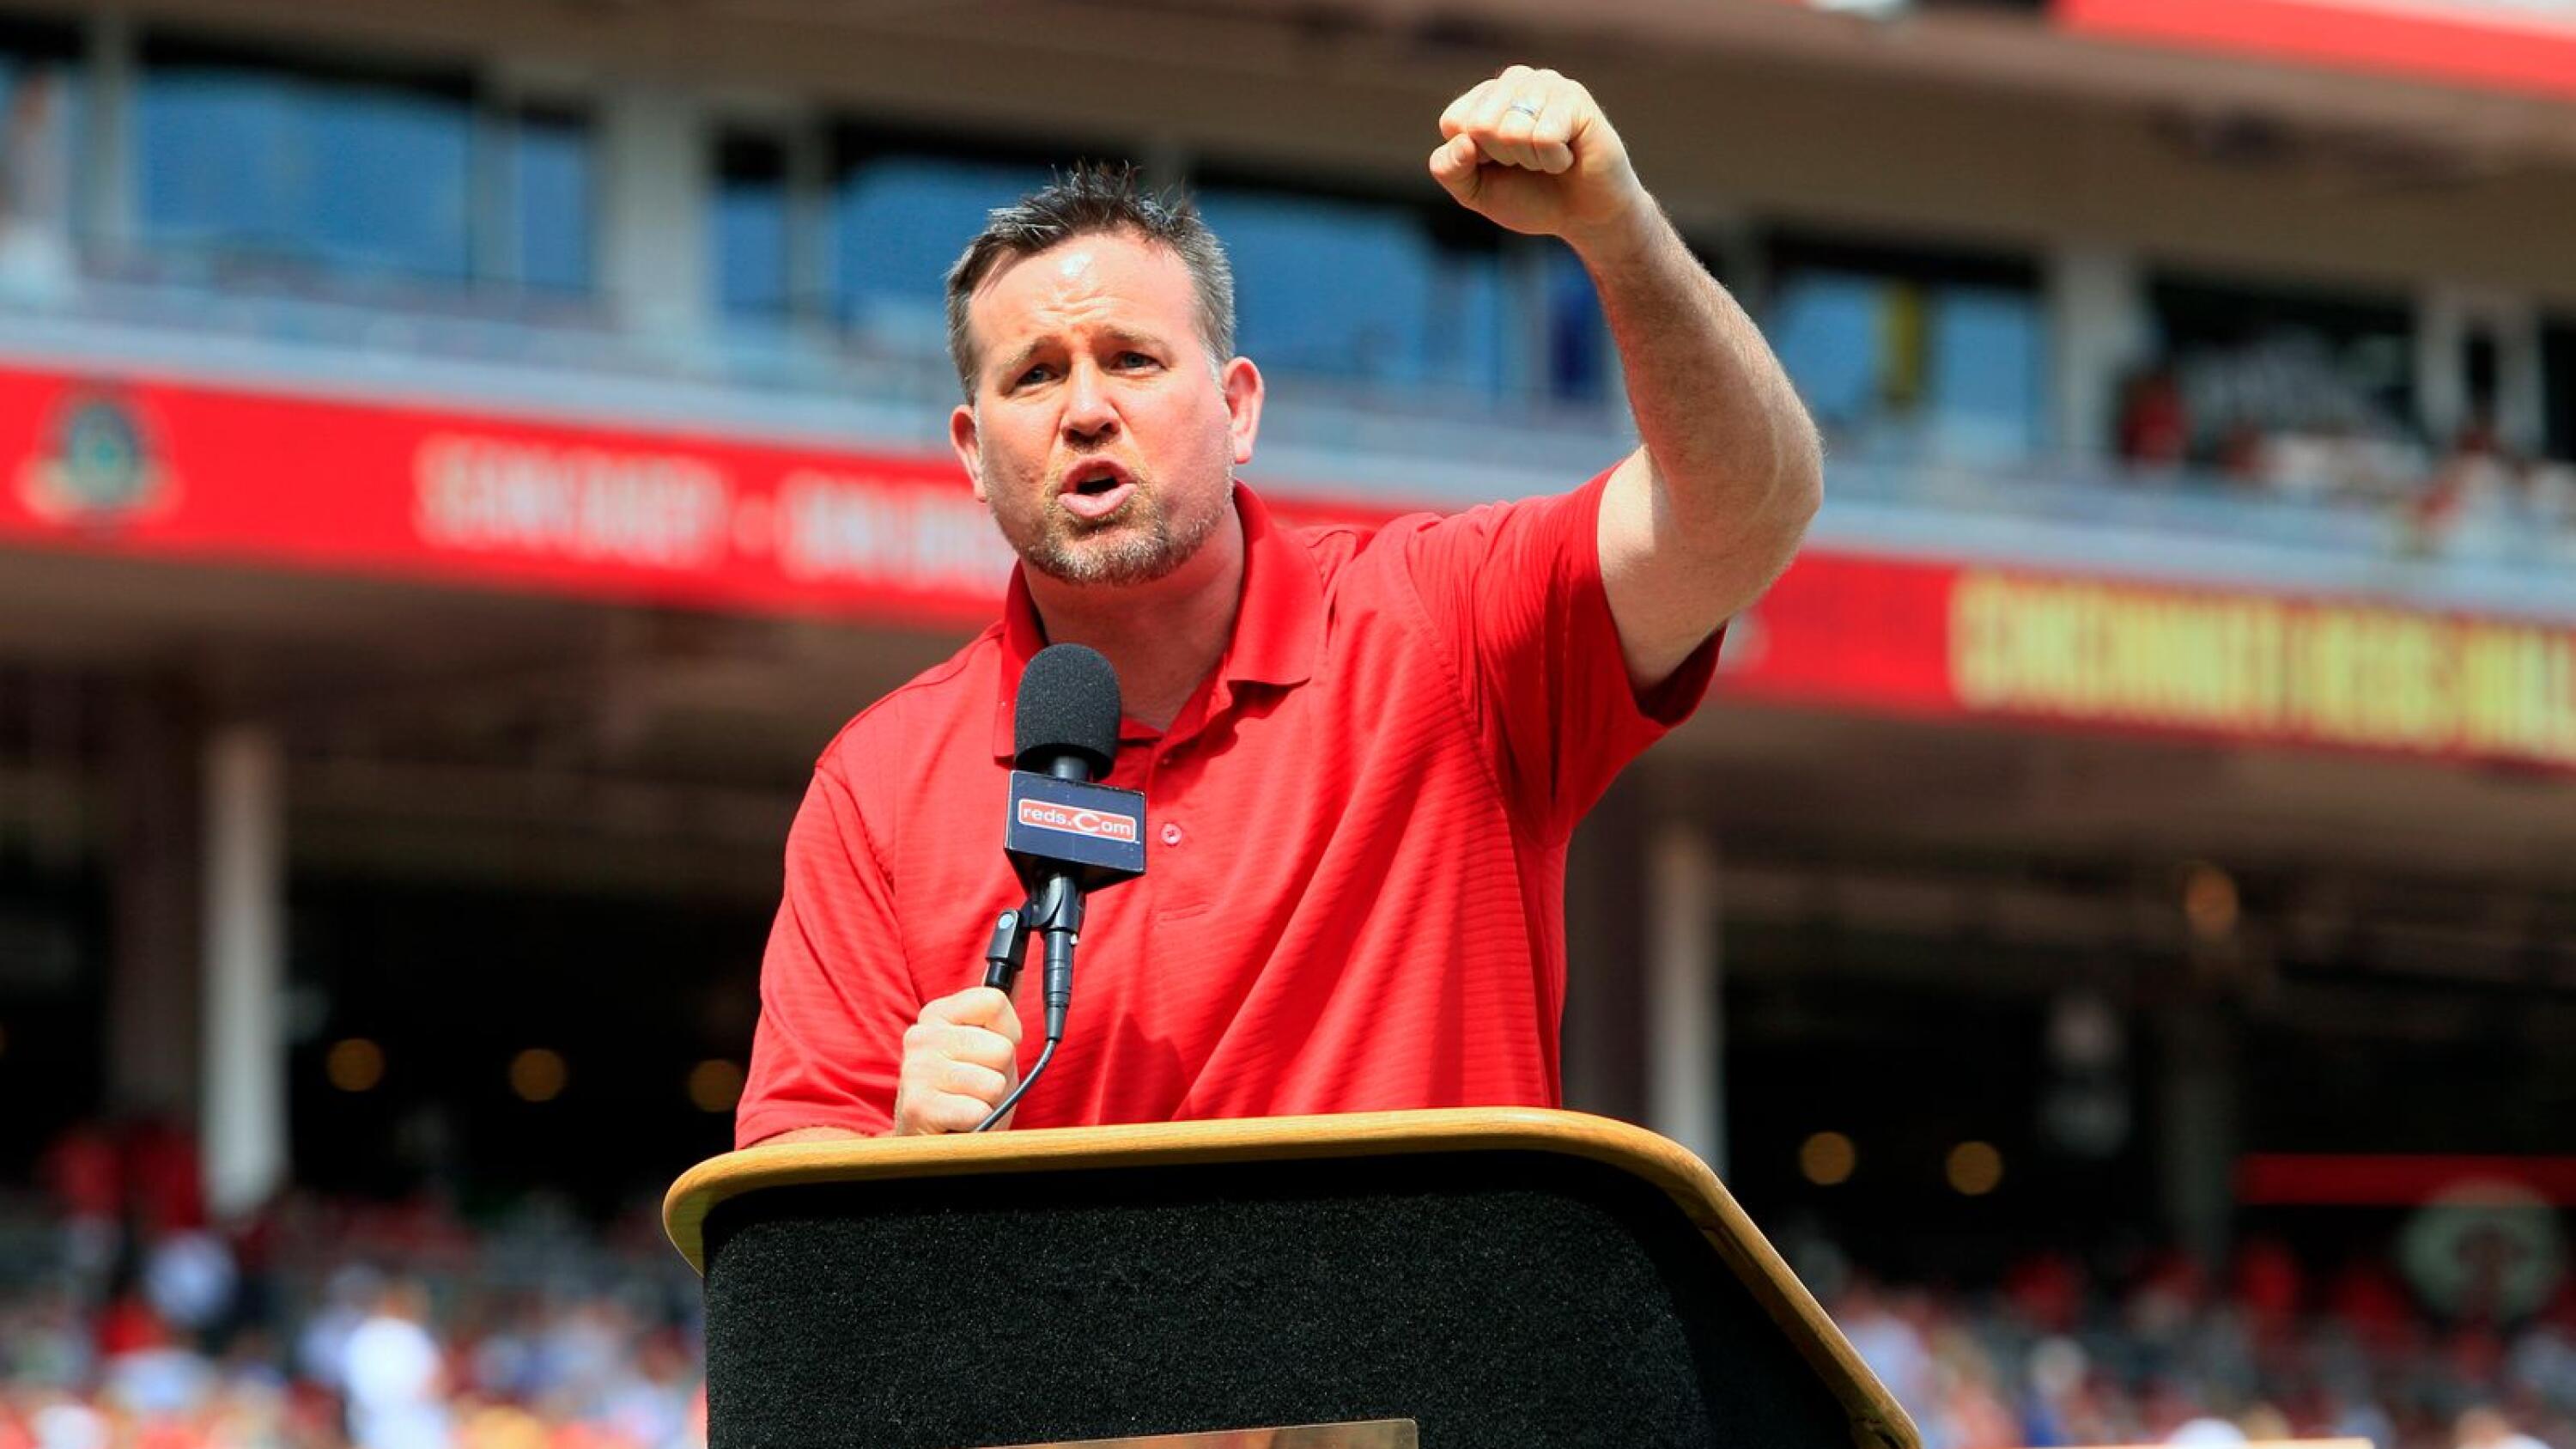 Yankees hire former All-Star Sean Casey as new hitting coach